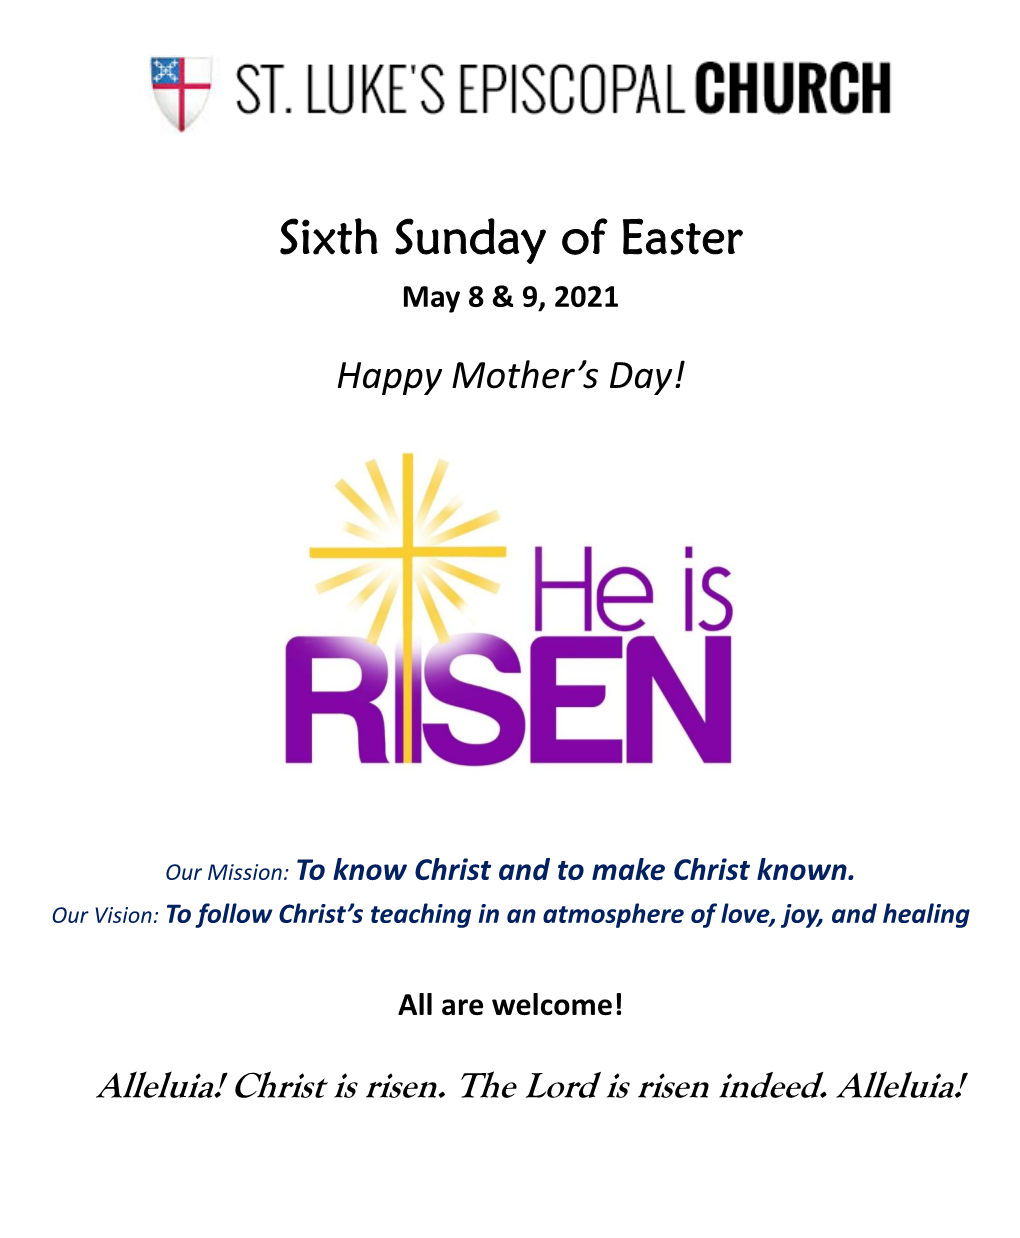 Sixth Sunday of Easter May 8 & 9, 2021